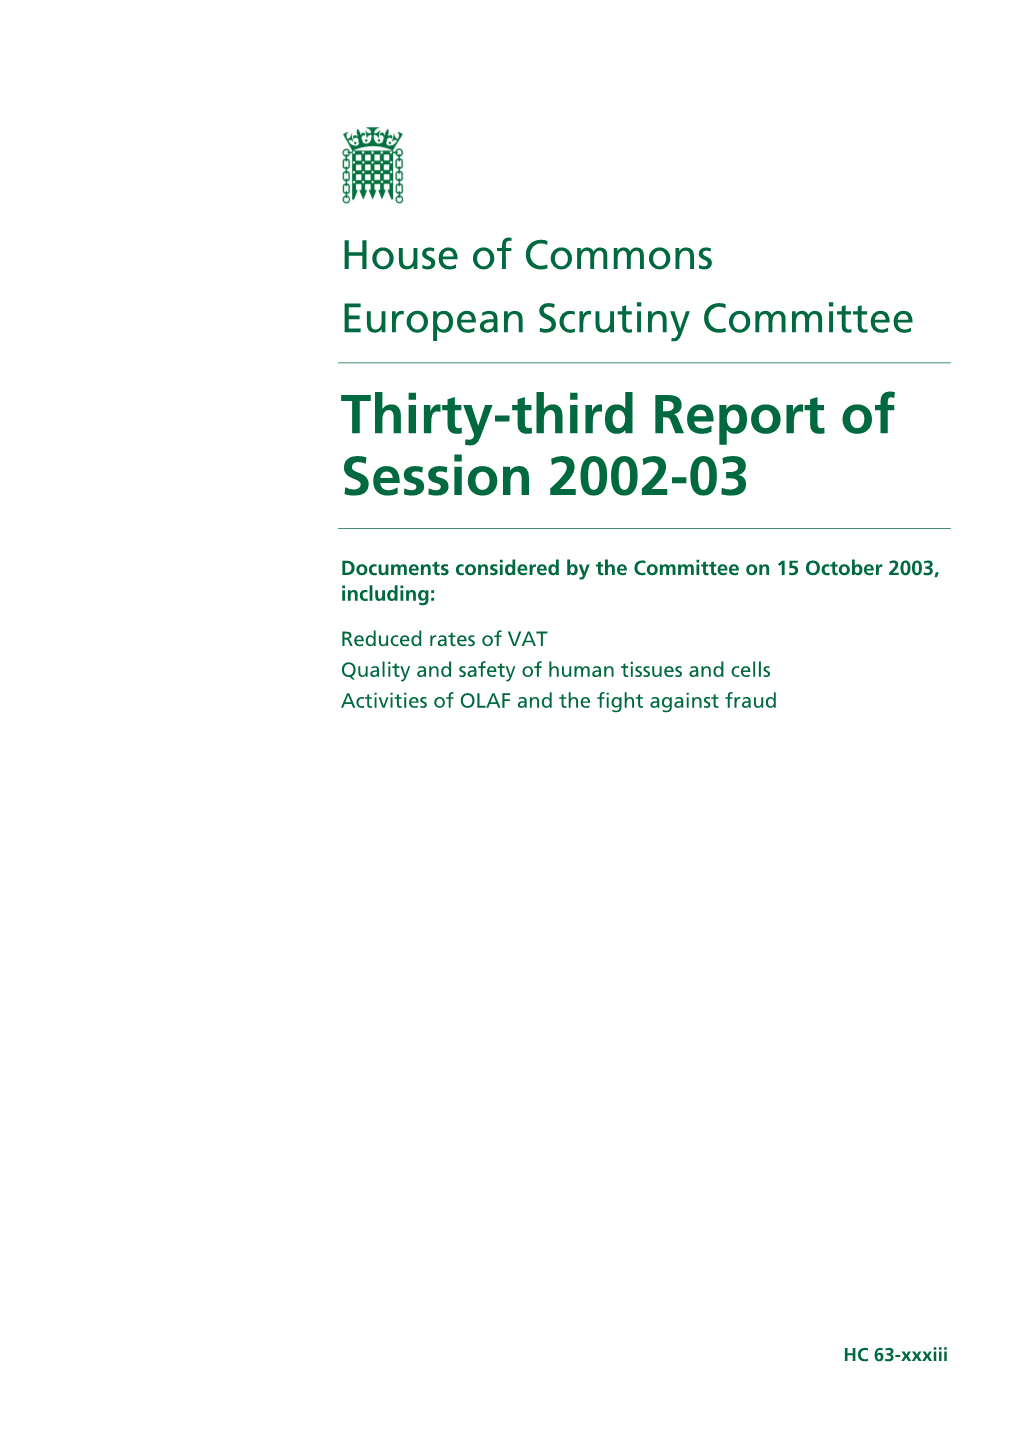 Thirty-Third Report of Session 2002-03